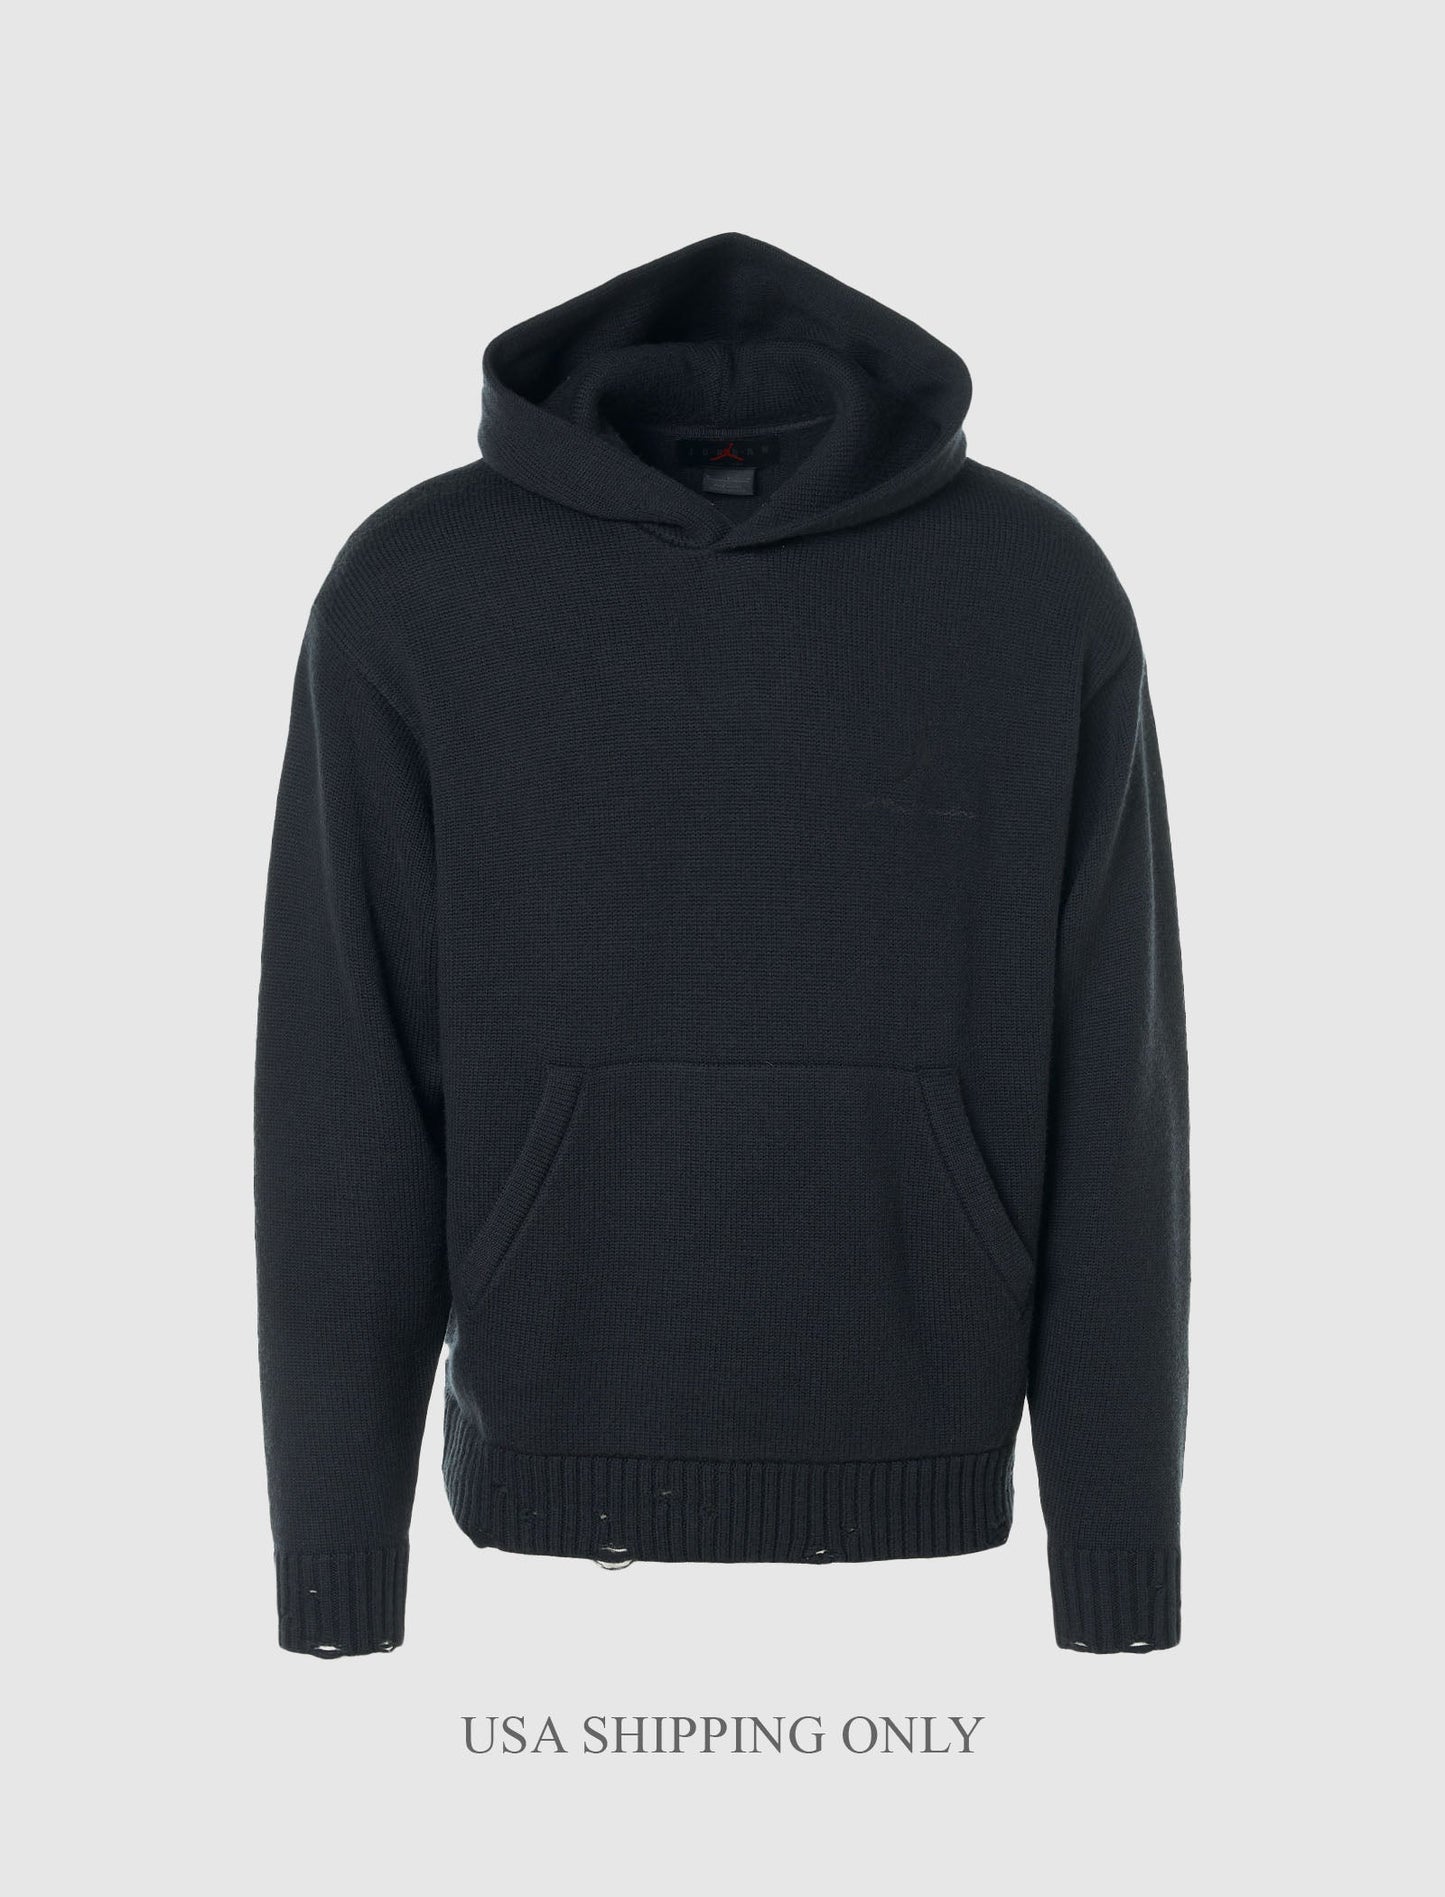 A MA MANIÉRE HOODIE SWEATER - USA ONLY